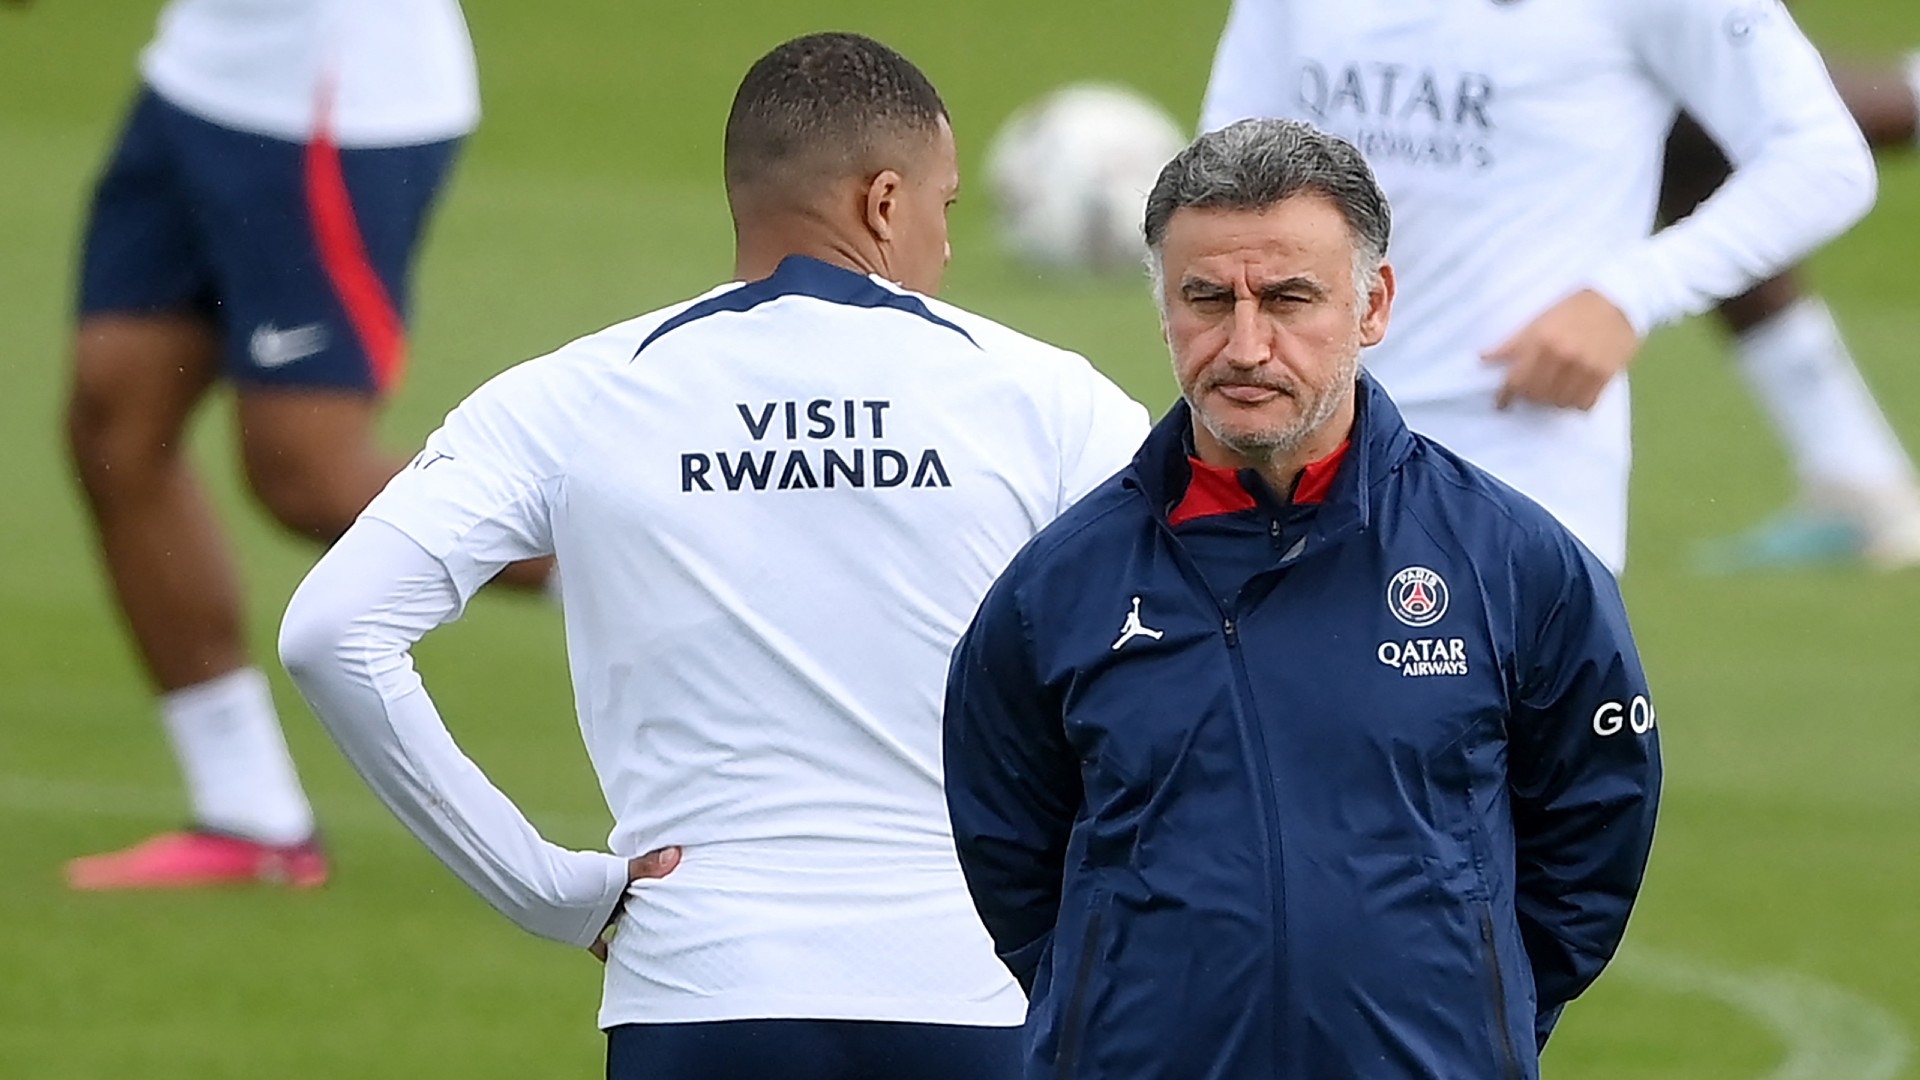 Paris Saint-Germain's French head coach Christophe Galtier attend a training session in Saint-Germain-en-Laye, on the outskirts of Paris, on 5 May 2023 (AFP)